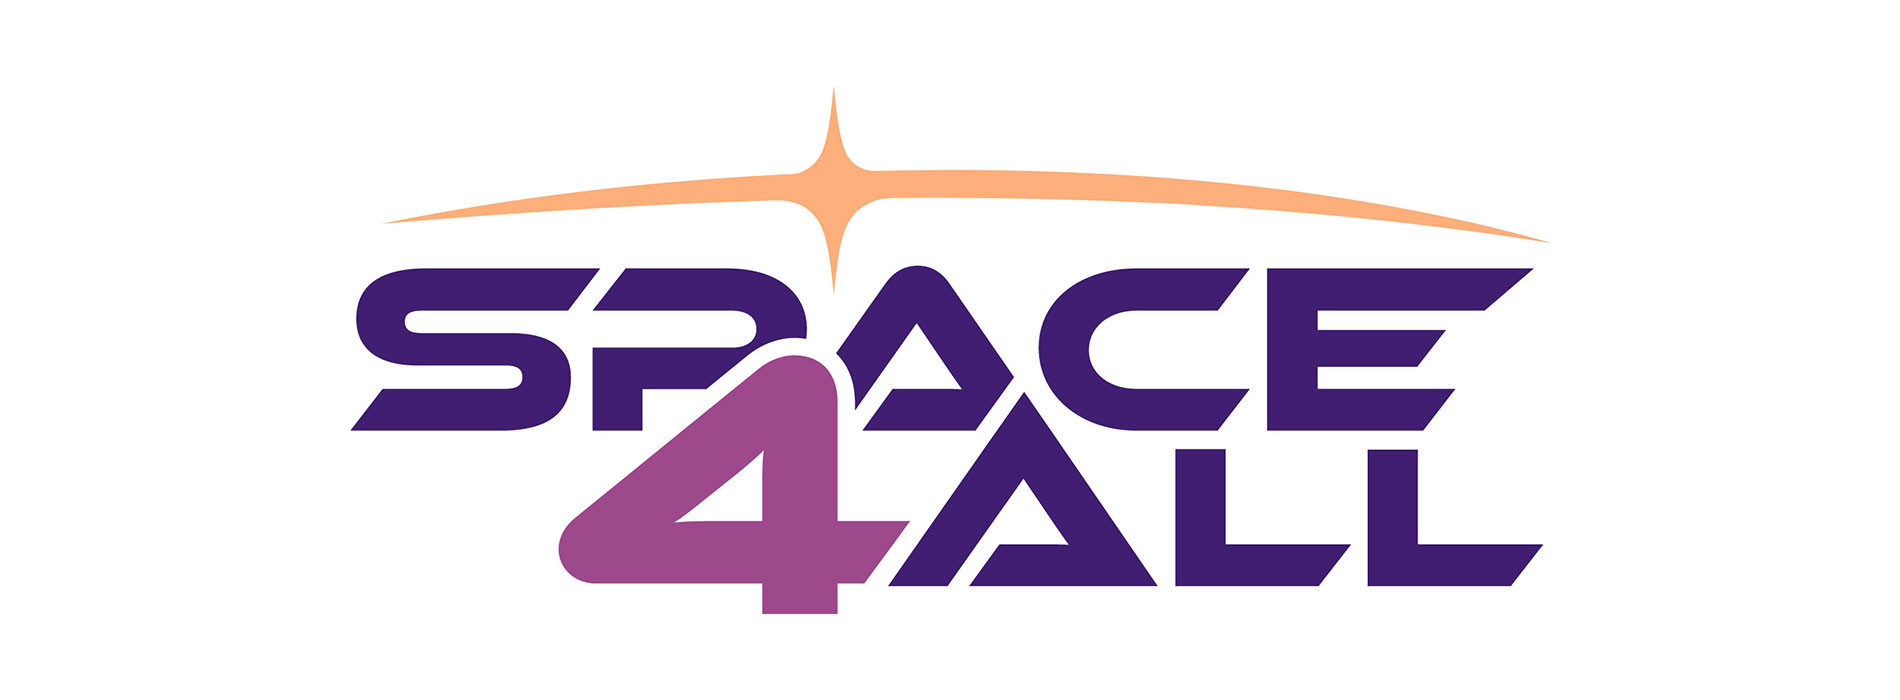 Space4All Space STEM Awareness Campaign Launches Nationwide